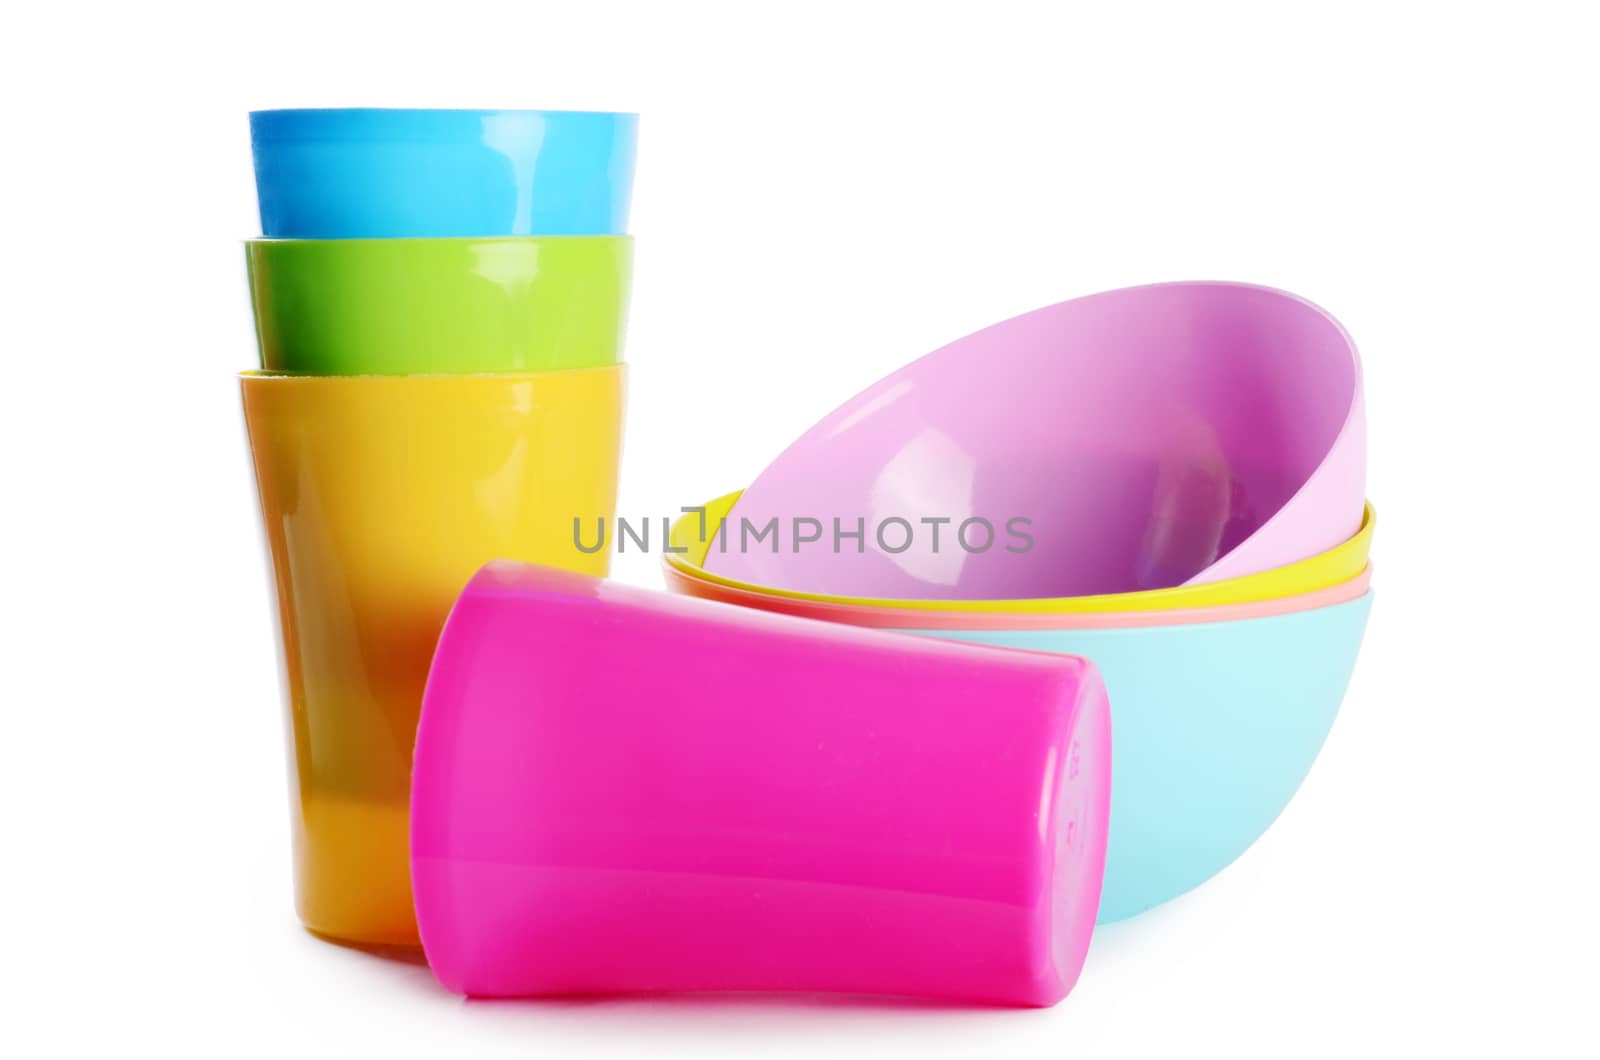 Colorful plastic cups and plates by SvetaVo